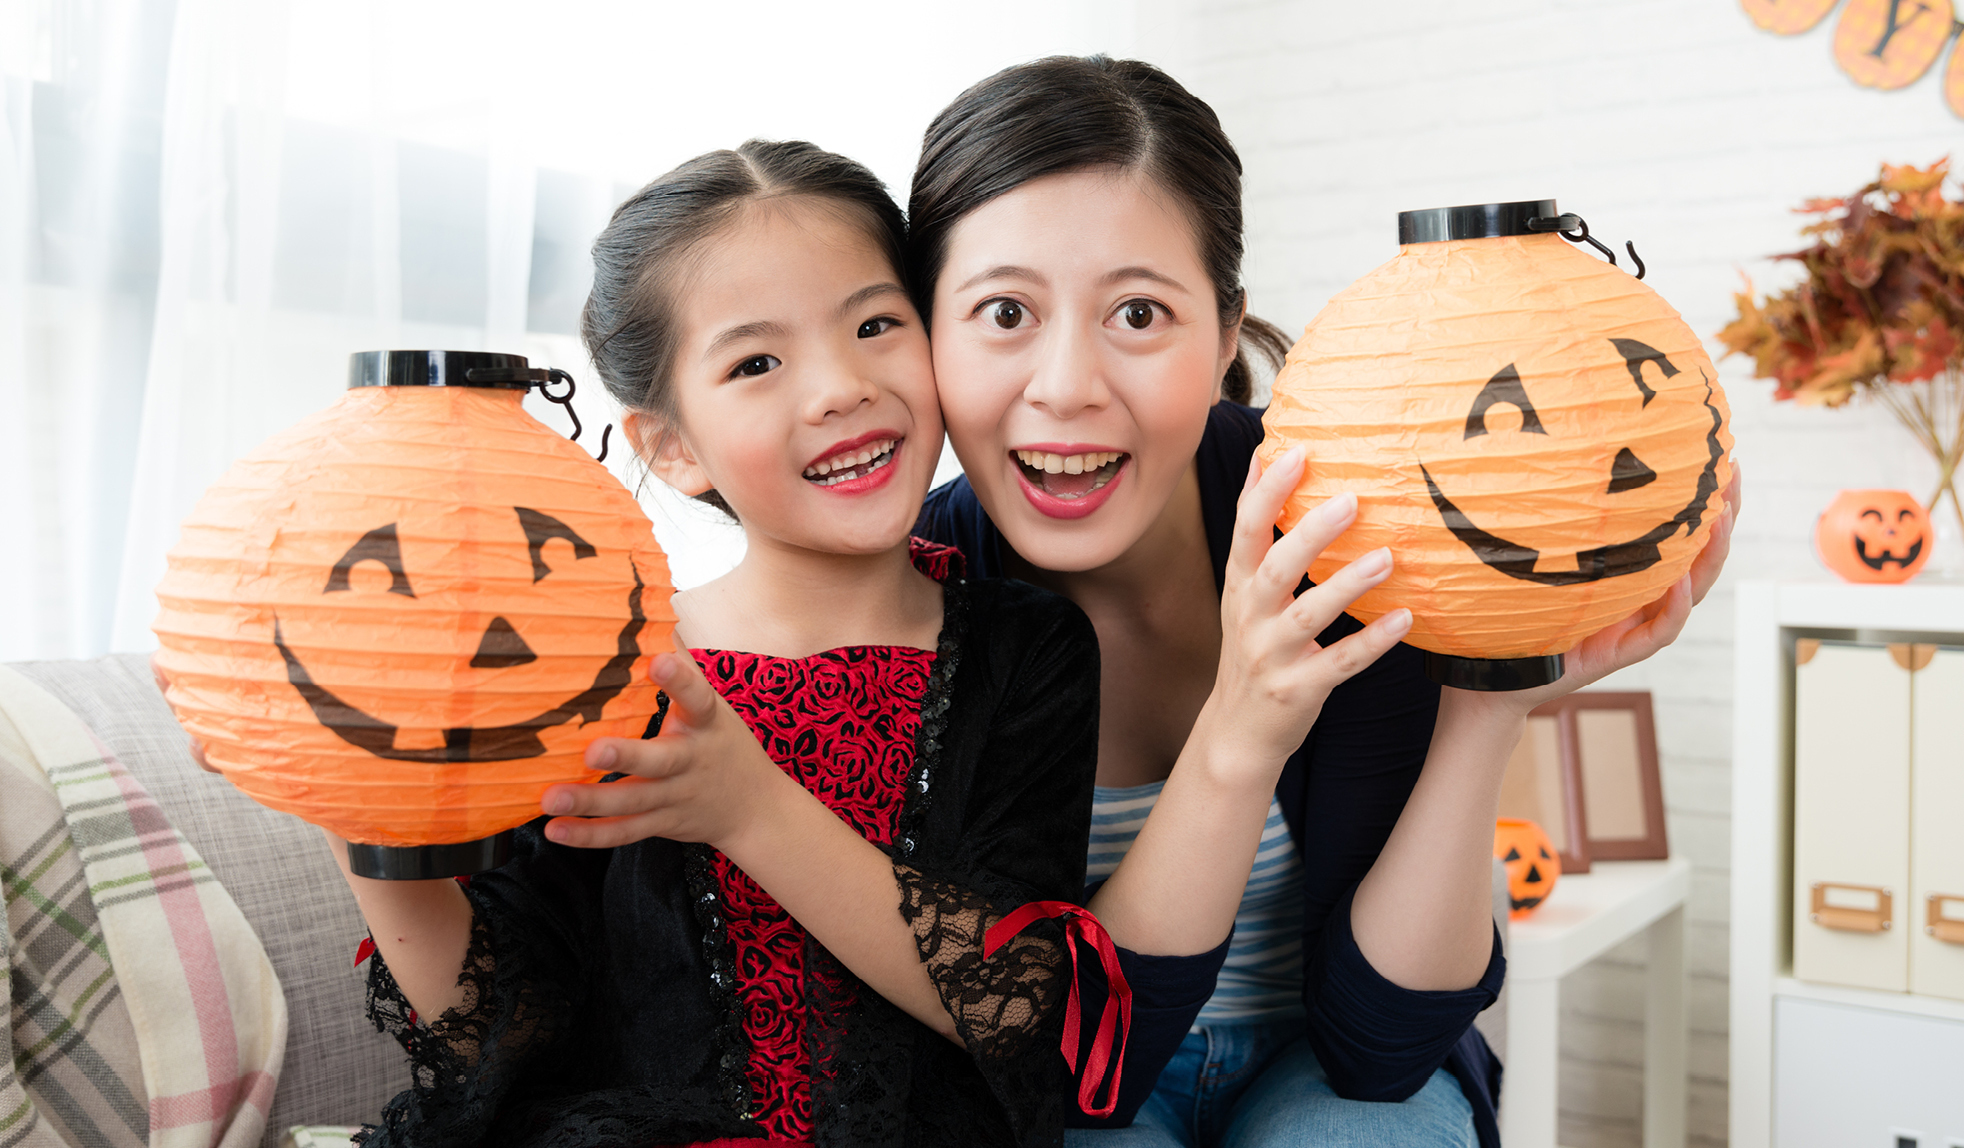 Join us for our silly, spooky, and creeptacular Halloween programs!